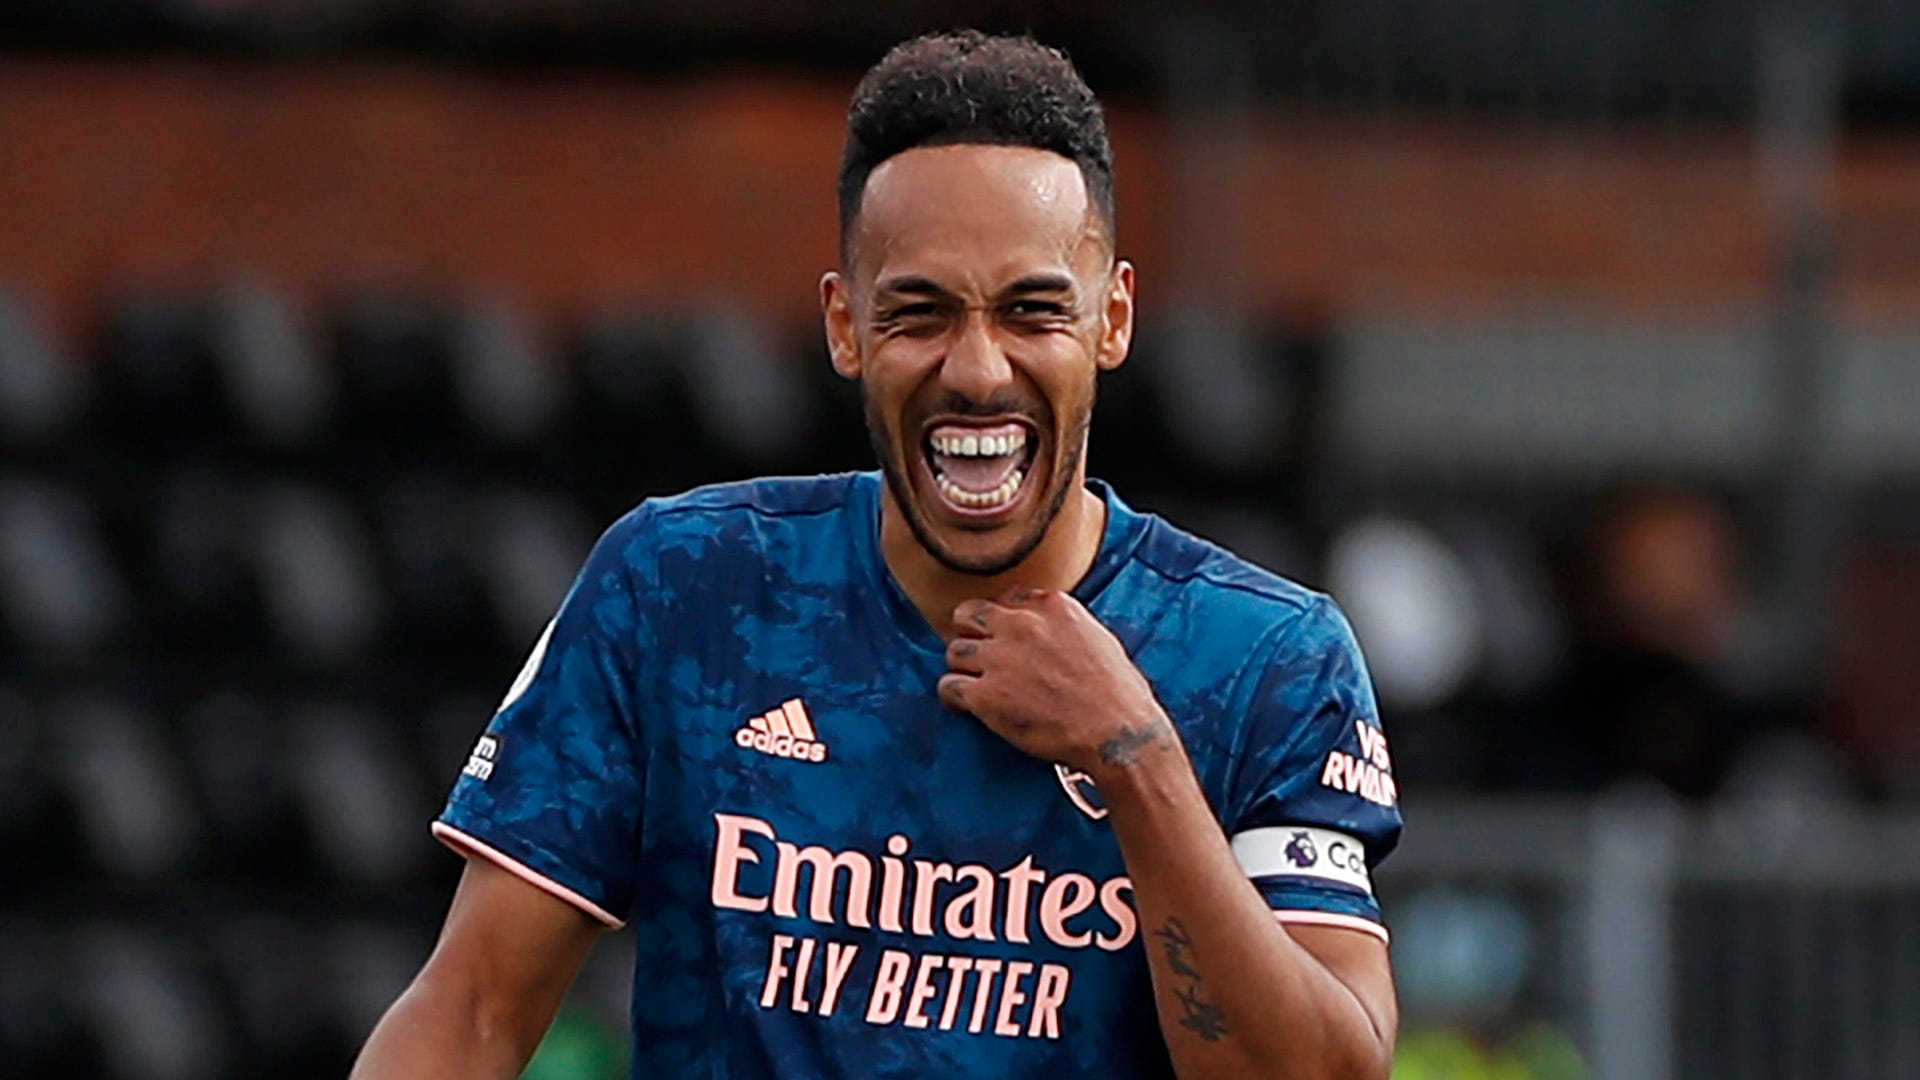 Arsenal to offer Pierre-Emerick Aubameyang contract worth £250,000-per-week  - Paper Round - Eurosport